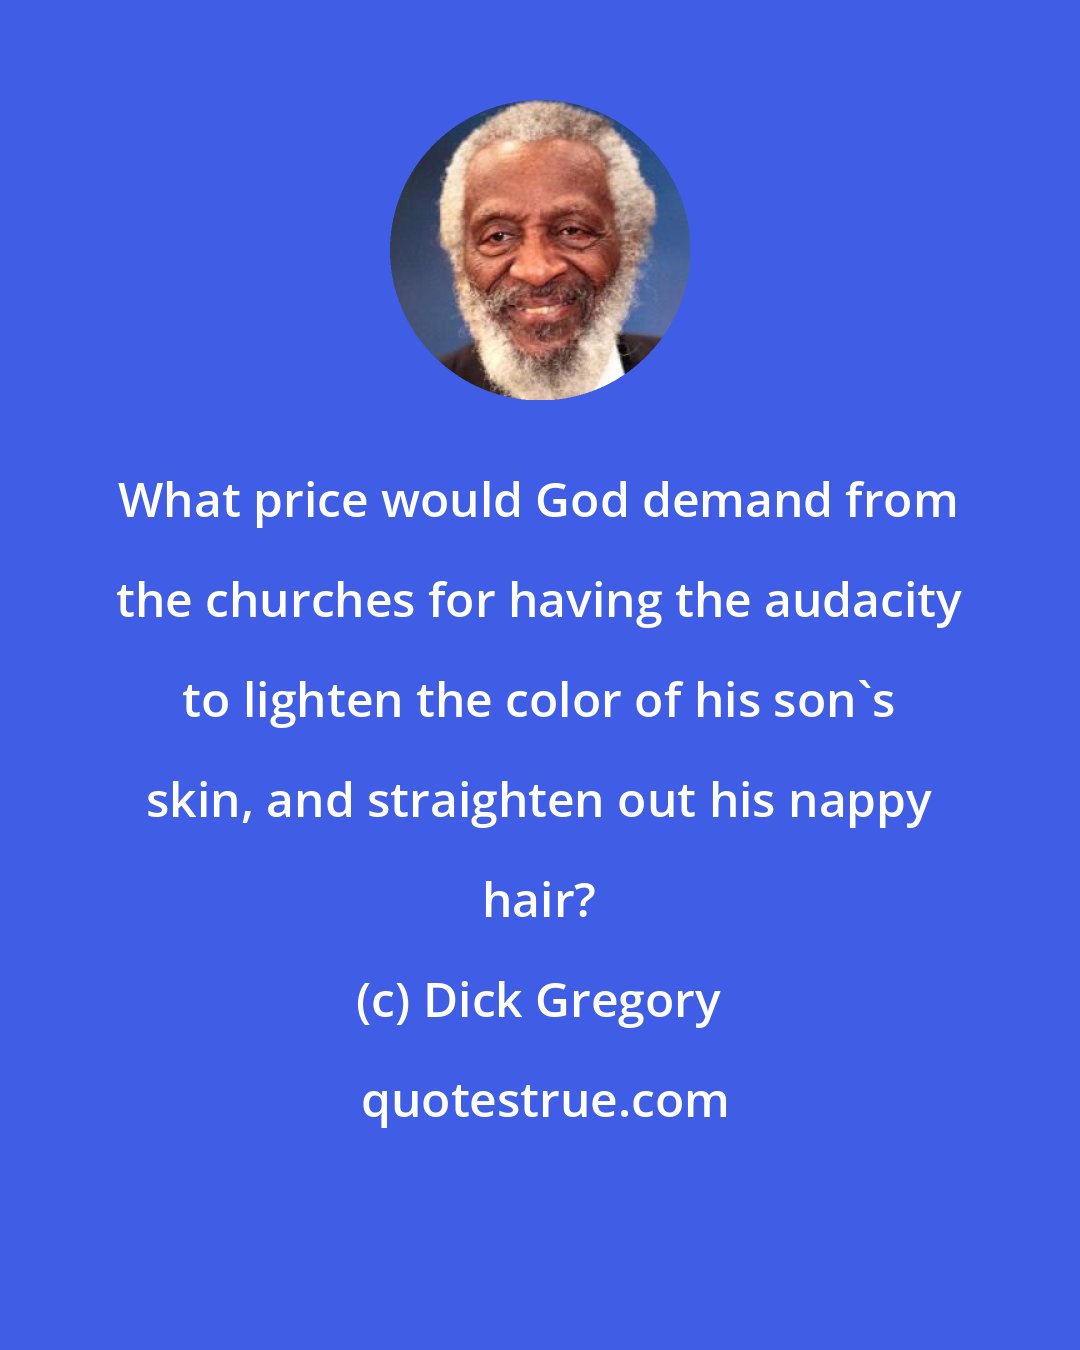 Dick Gregory: What price would God demand from the churches for having the audacity to lighten the color of his son's skin, and straighten out his nappy hair?